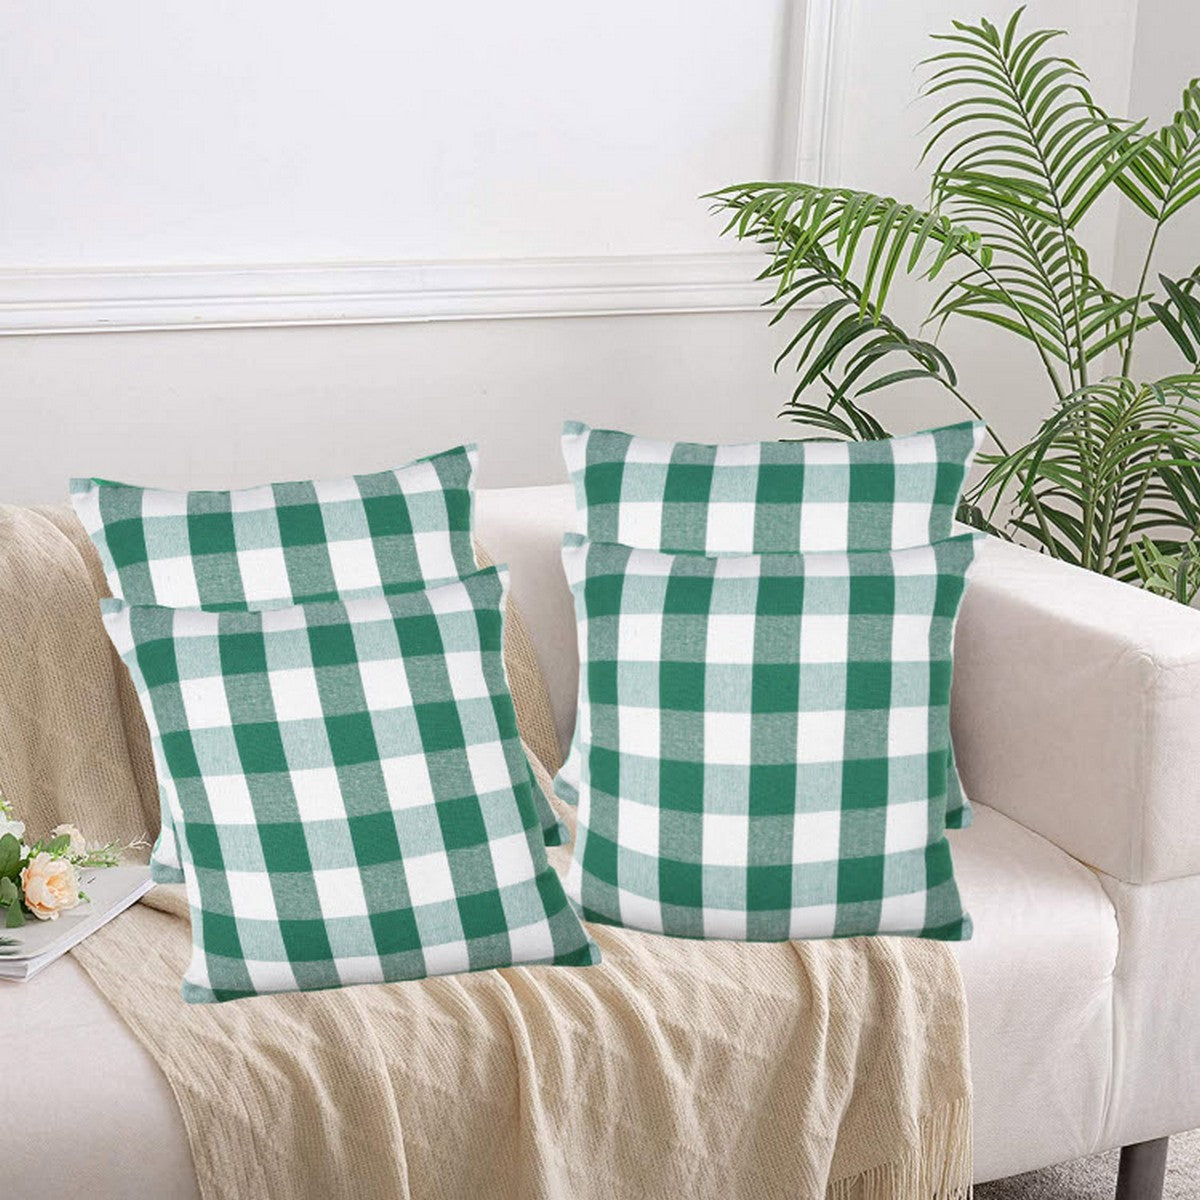 Lushomes Square Cushion Cover, Cotton Sofa Pillow Cover set of 4, 18x18 Inch, Big Checks, Green and White Checks, Pillow Cushions Covers (Pack of 4, 45x45 Cms)